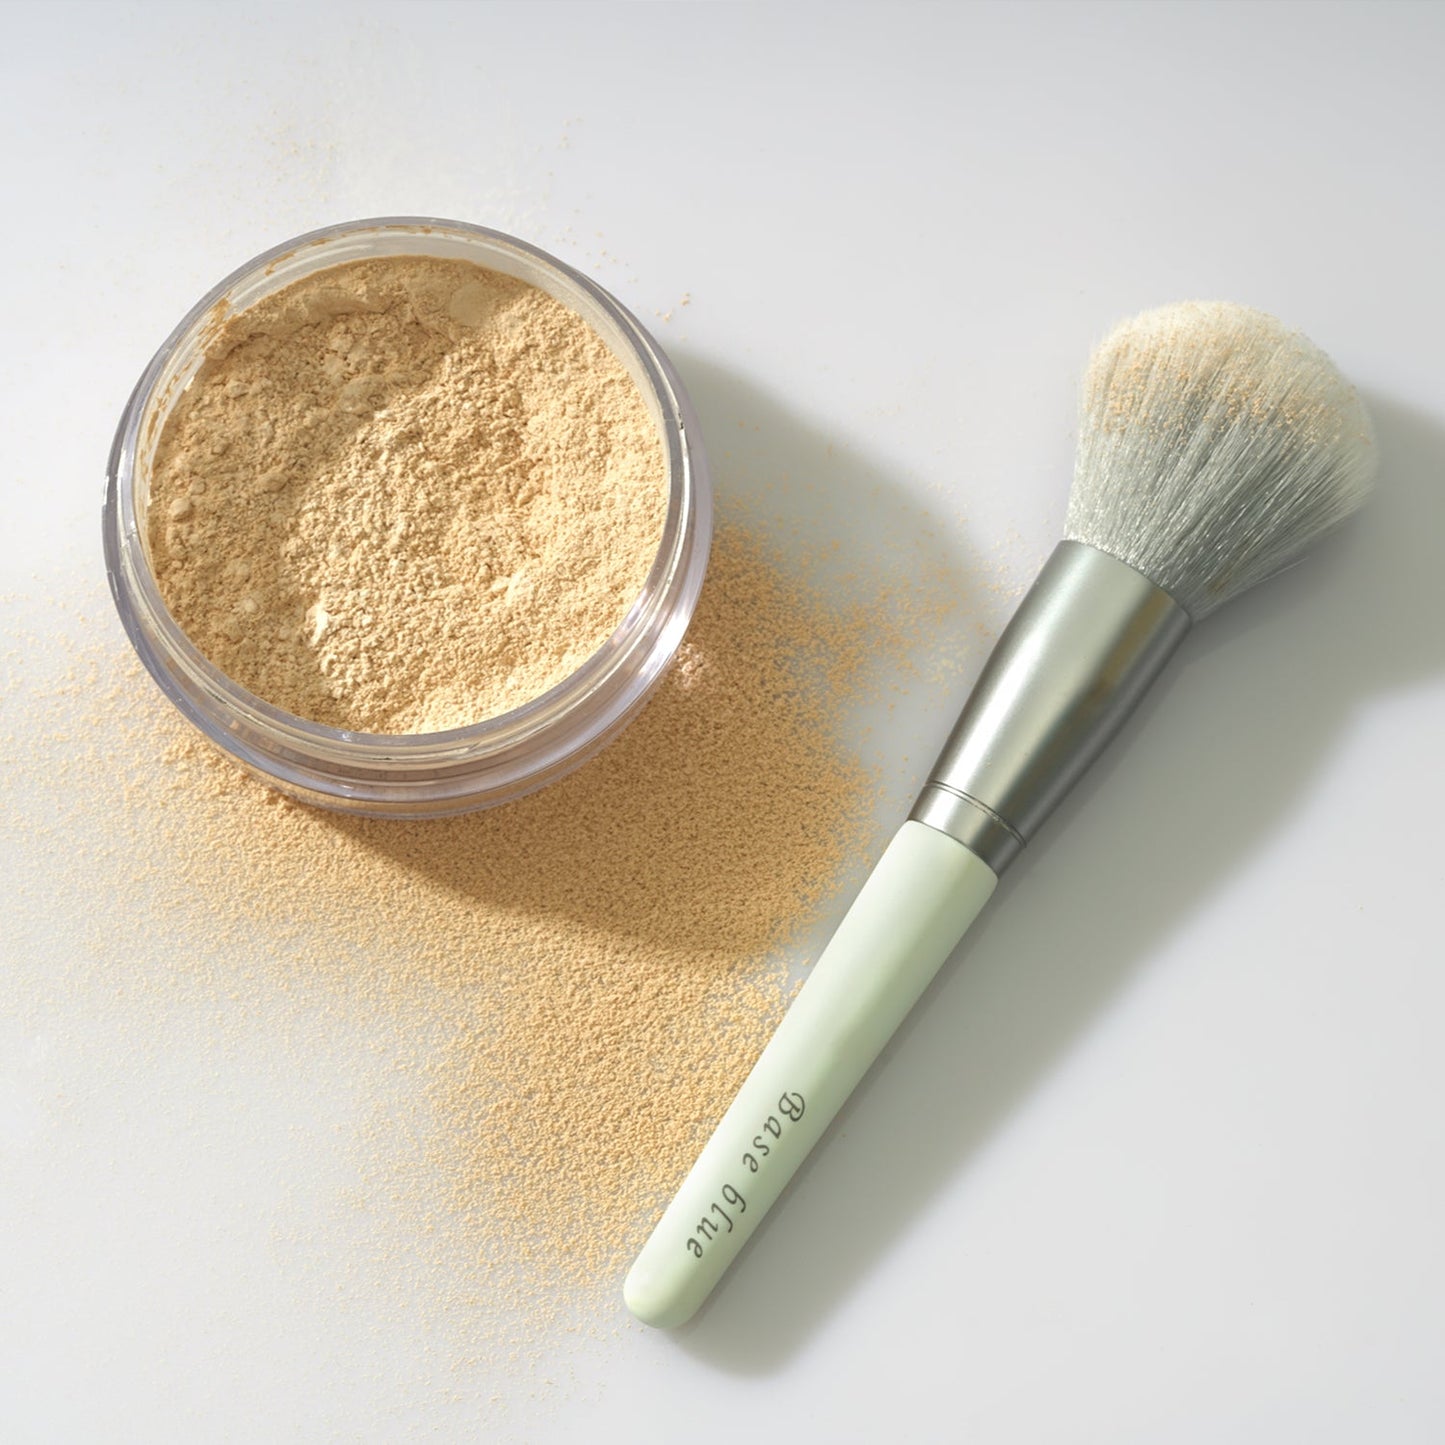 Image of Baseblue Mini Soft Brush next to a jar of powder, a compact travel-sized makeup brush for on-the-go beauty routines.